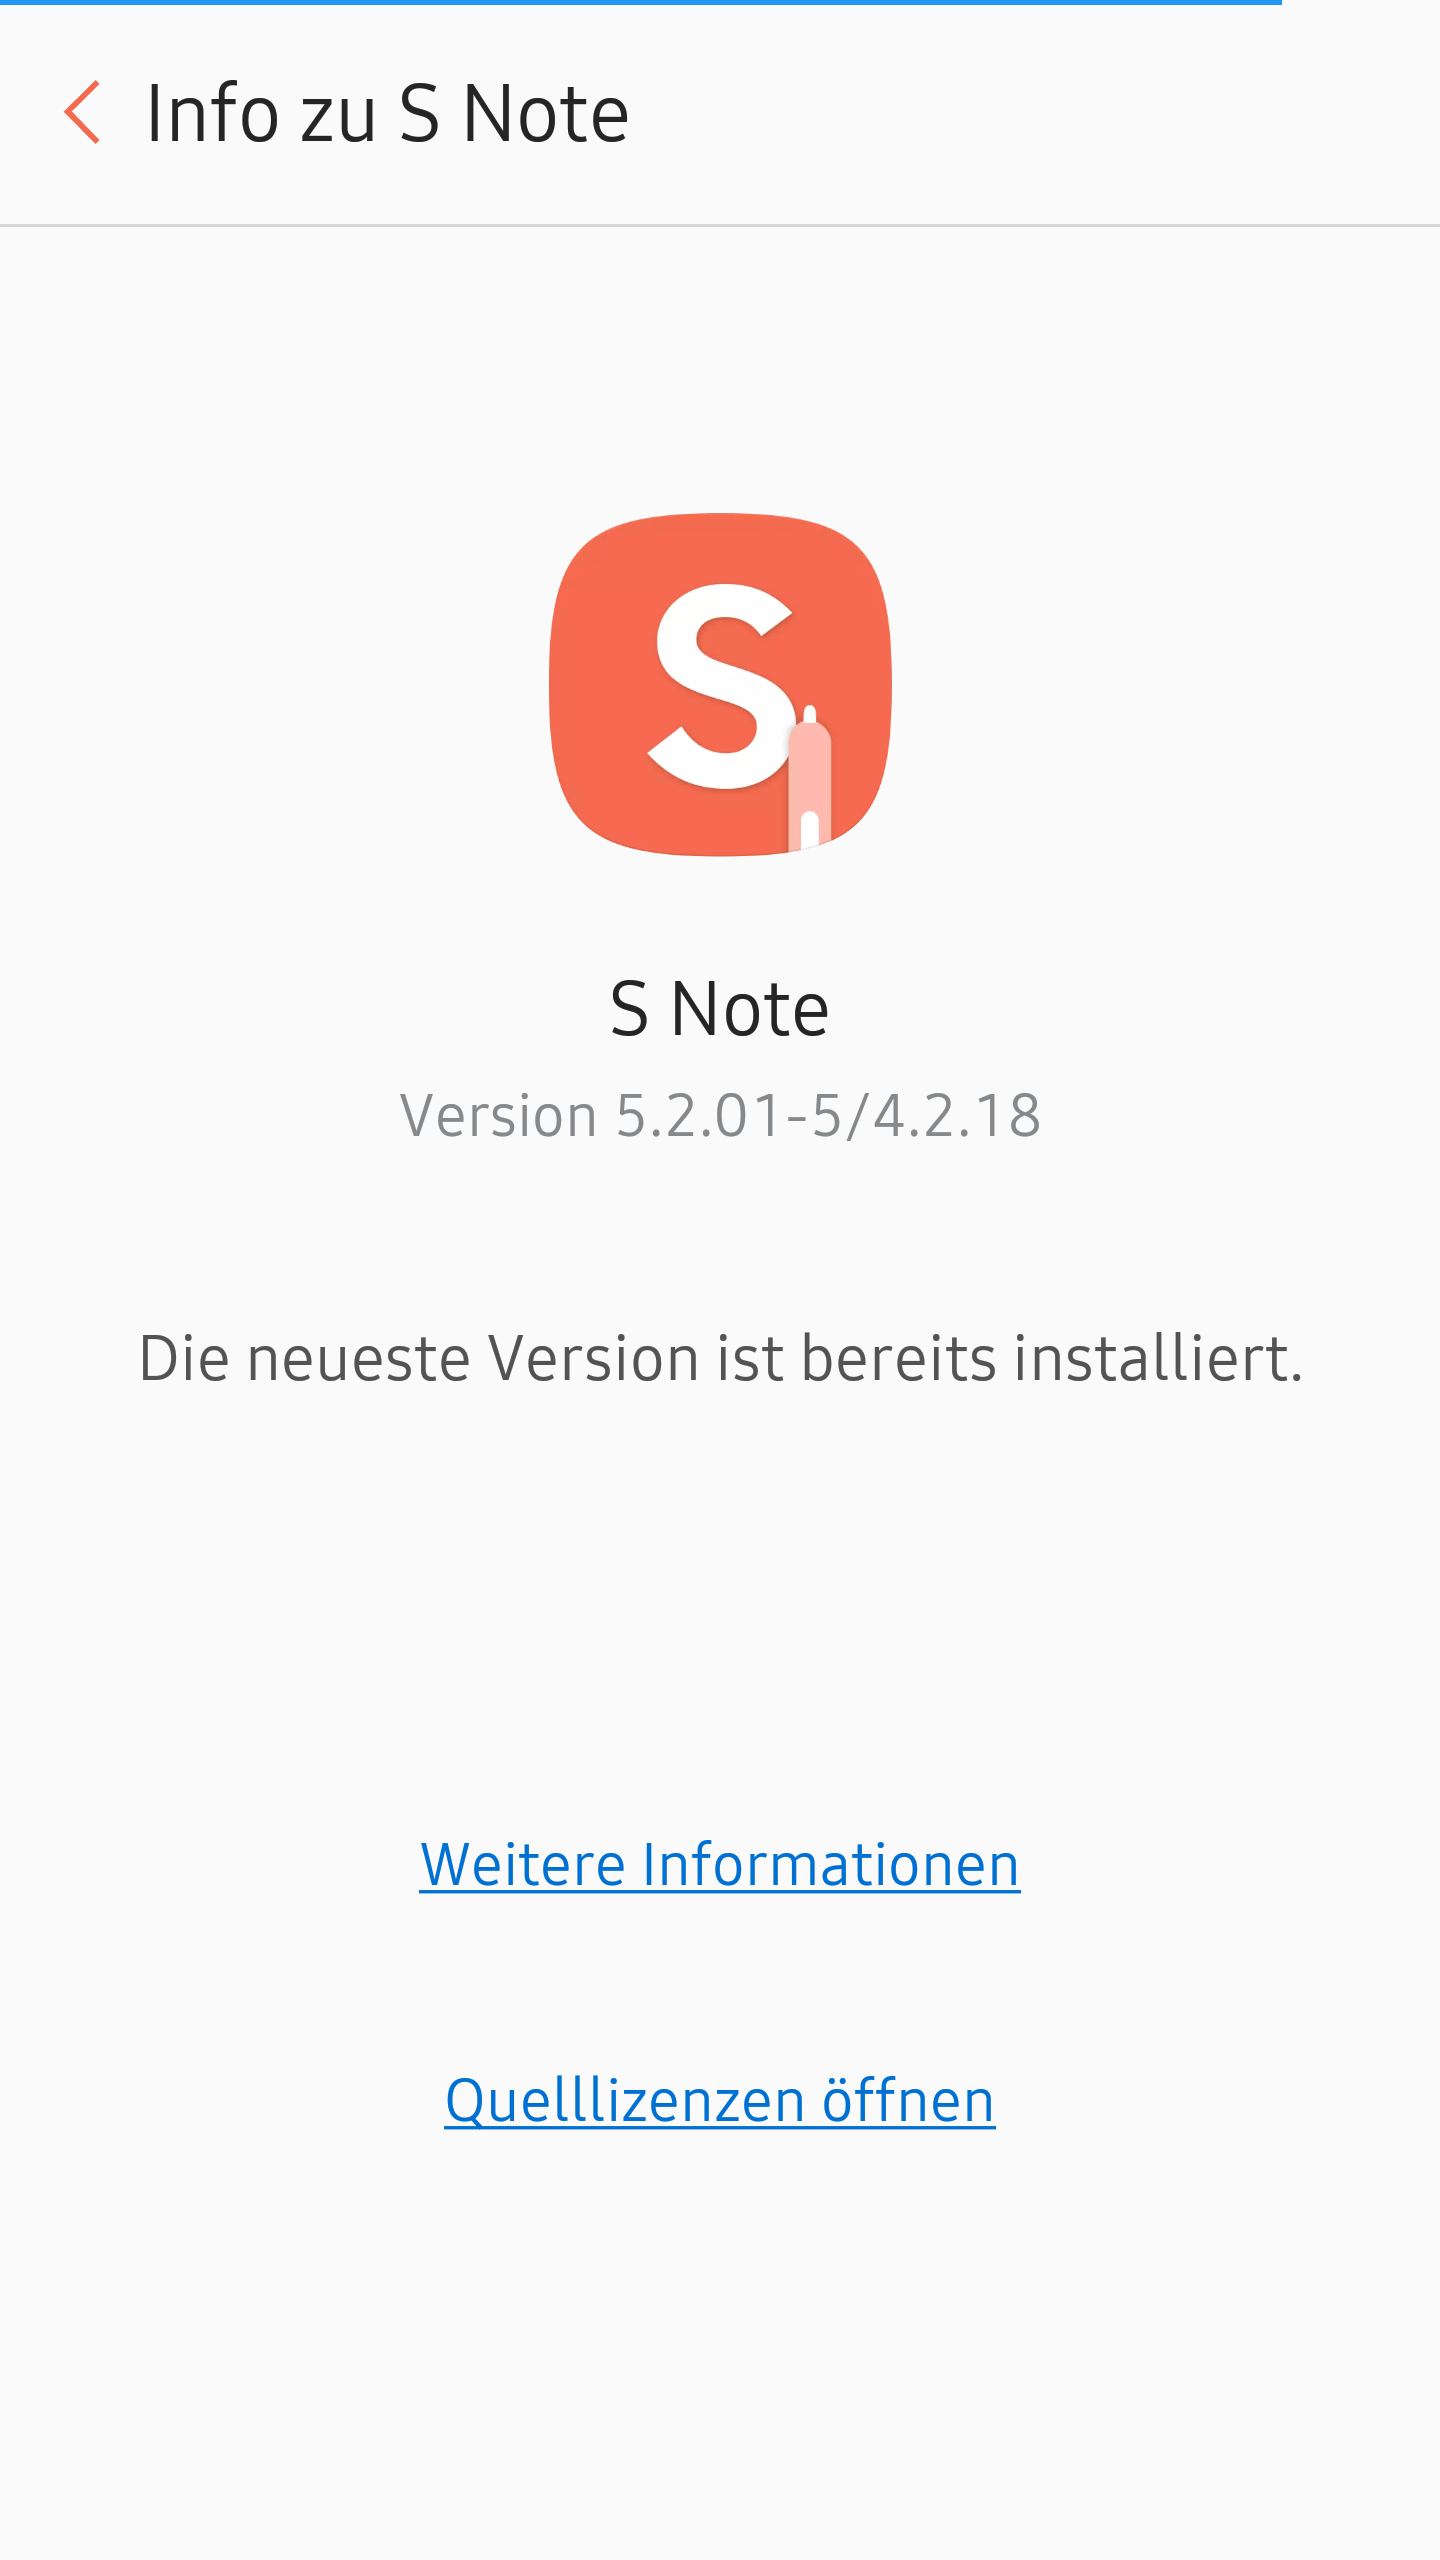 S Note App Logo - S Note: Beta-Version landet im Google Play Store - All About Samsung